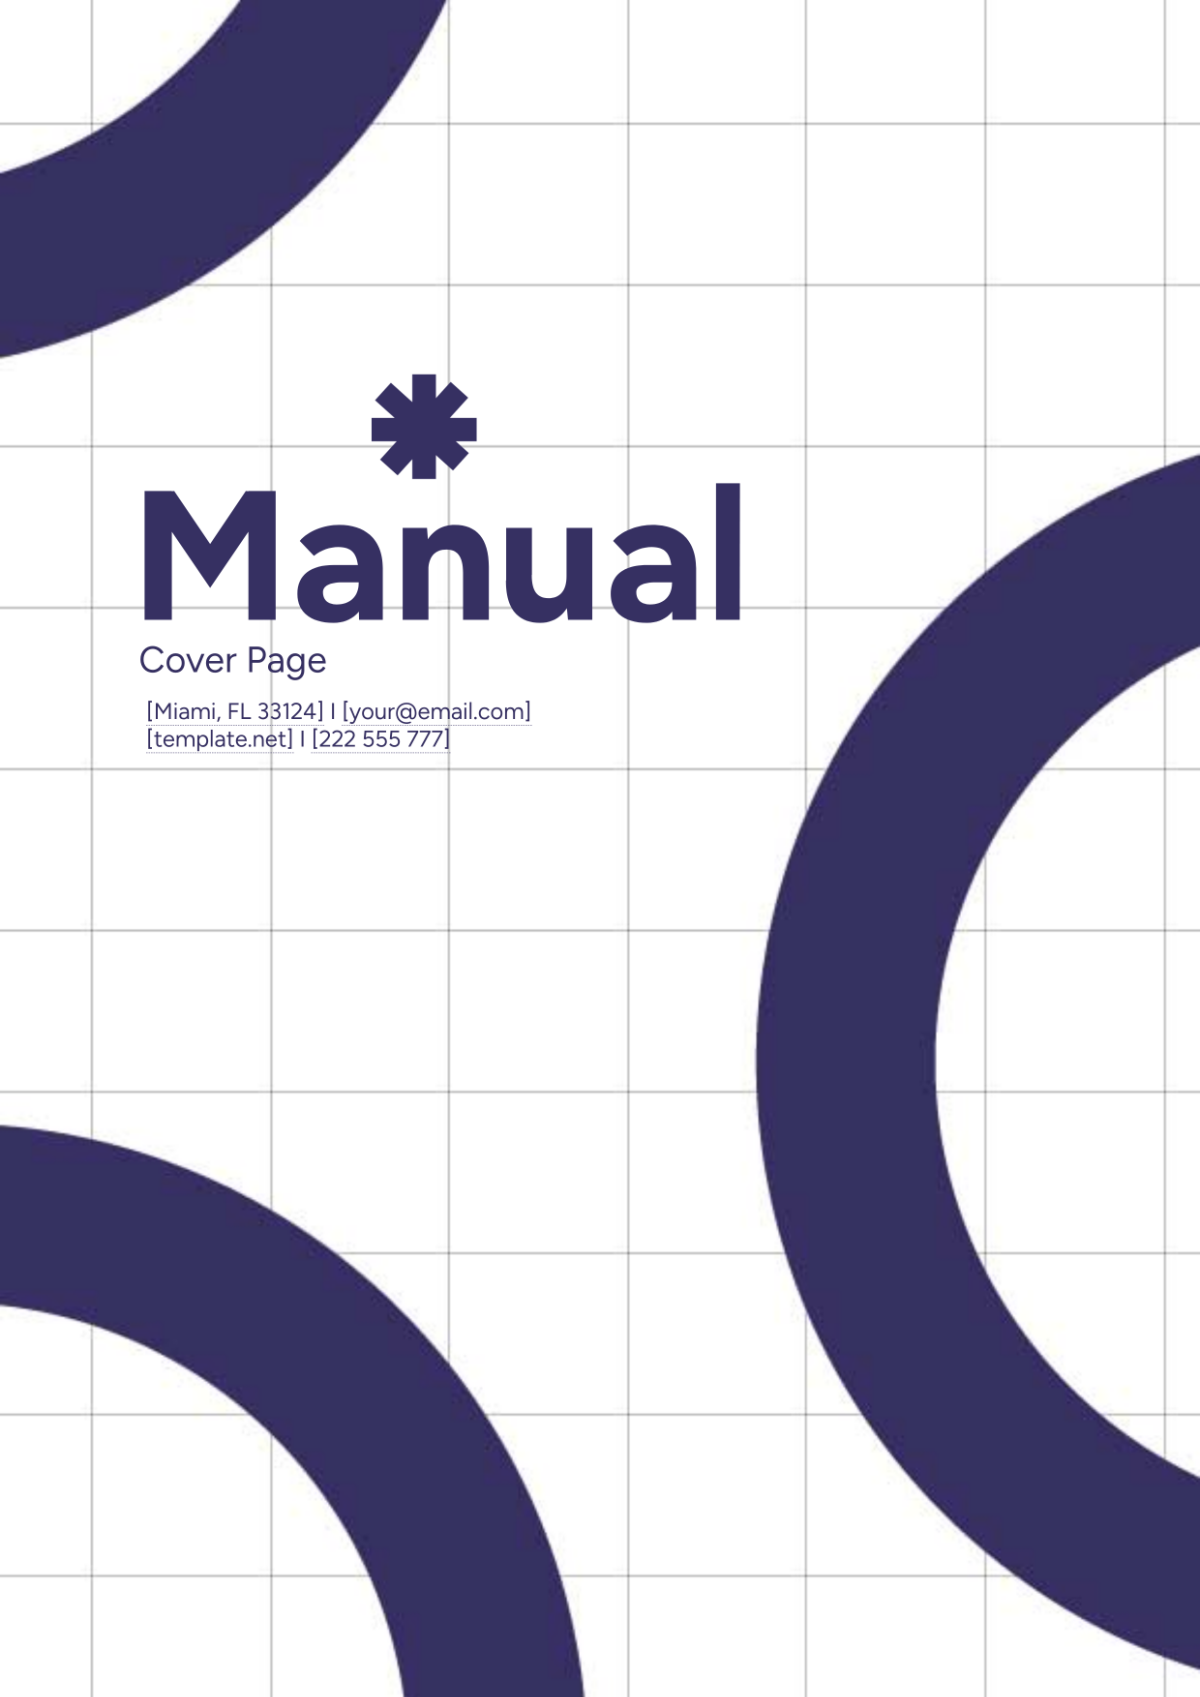 Manual Cover Page Template